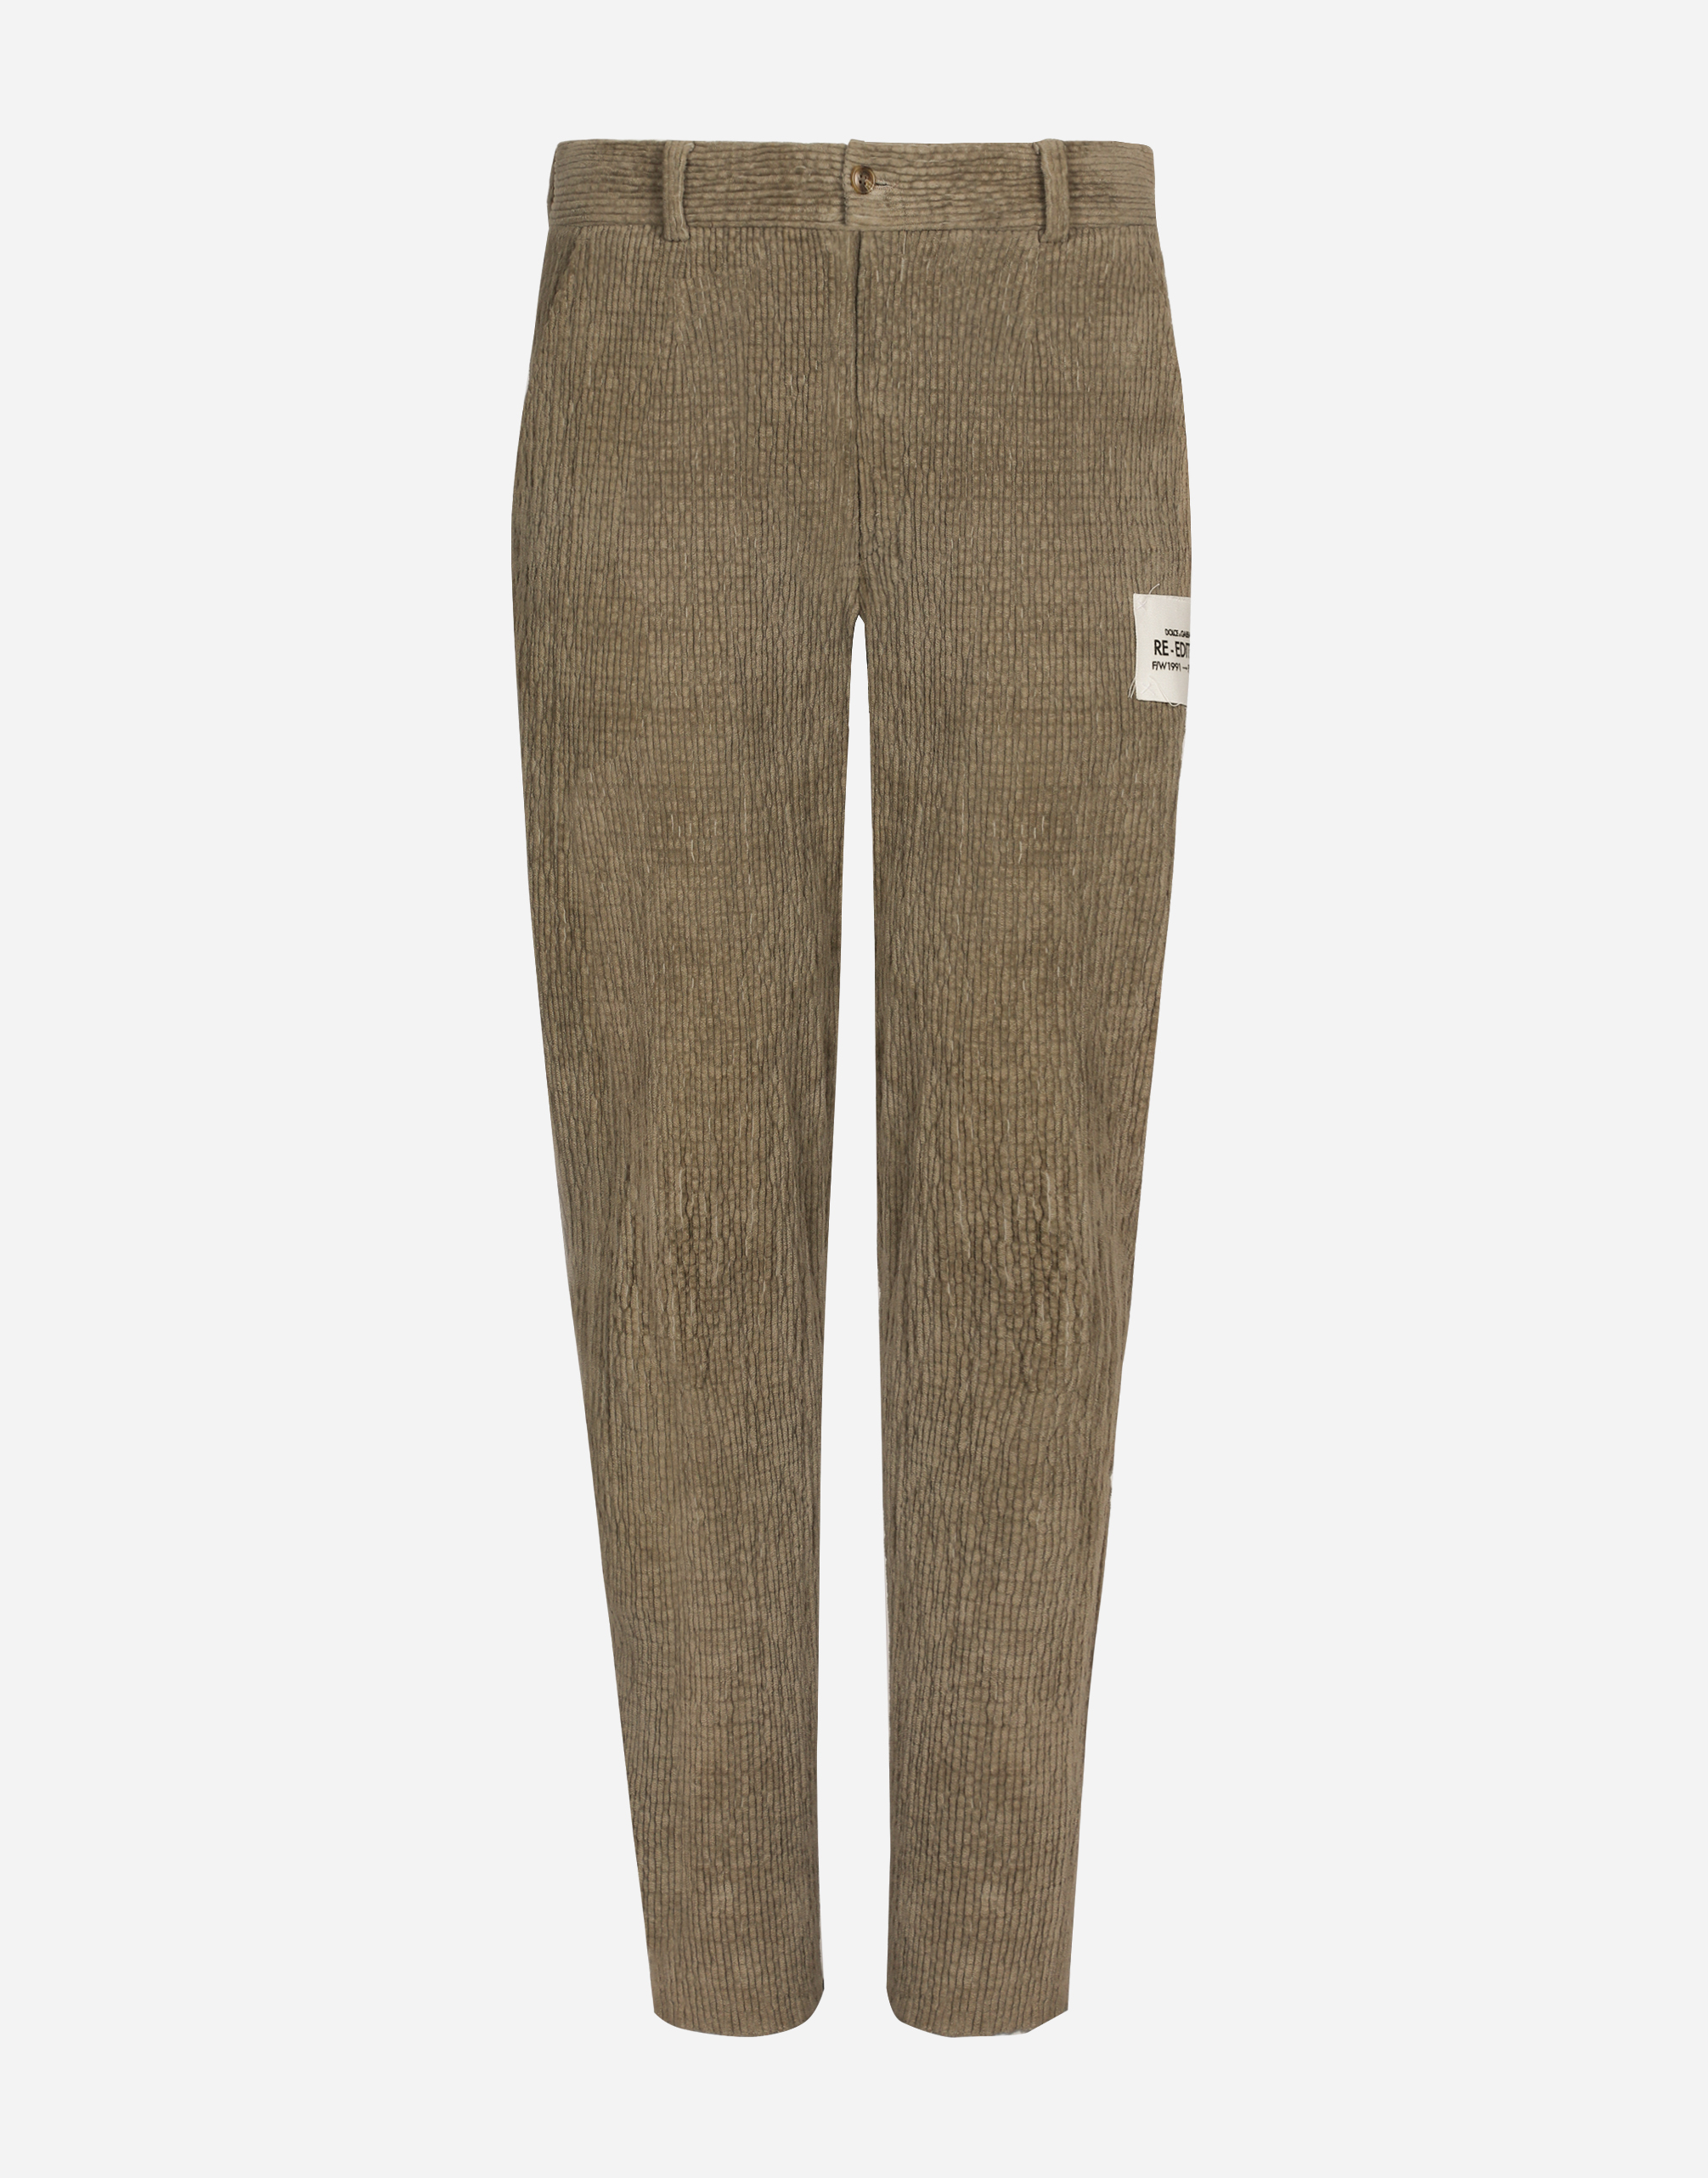 Dolce & Gabbana Corduroy Pants With Re-edition Label In Multicolor